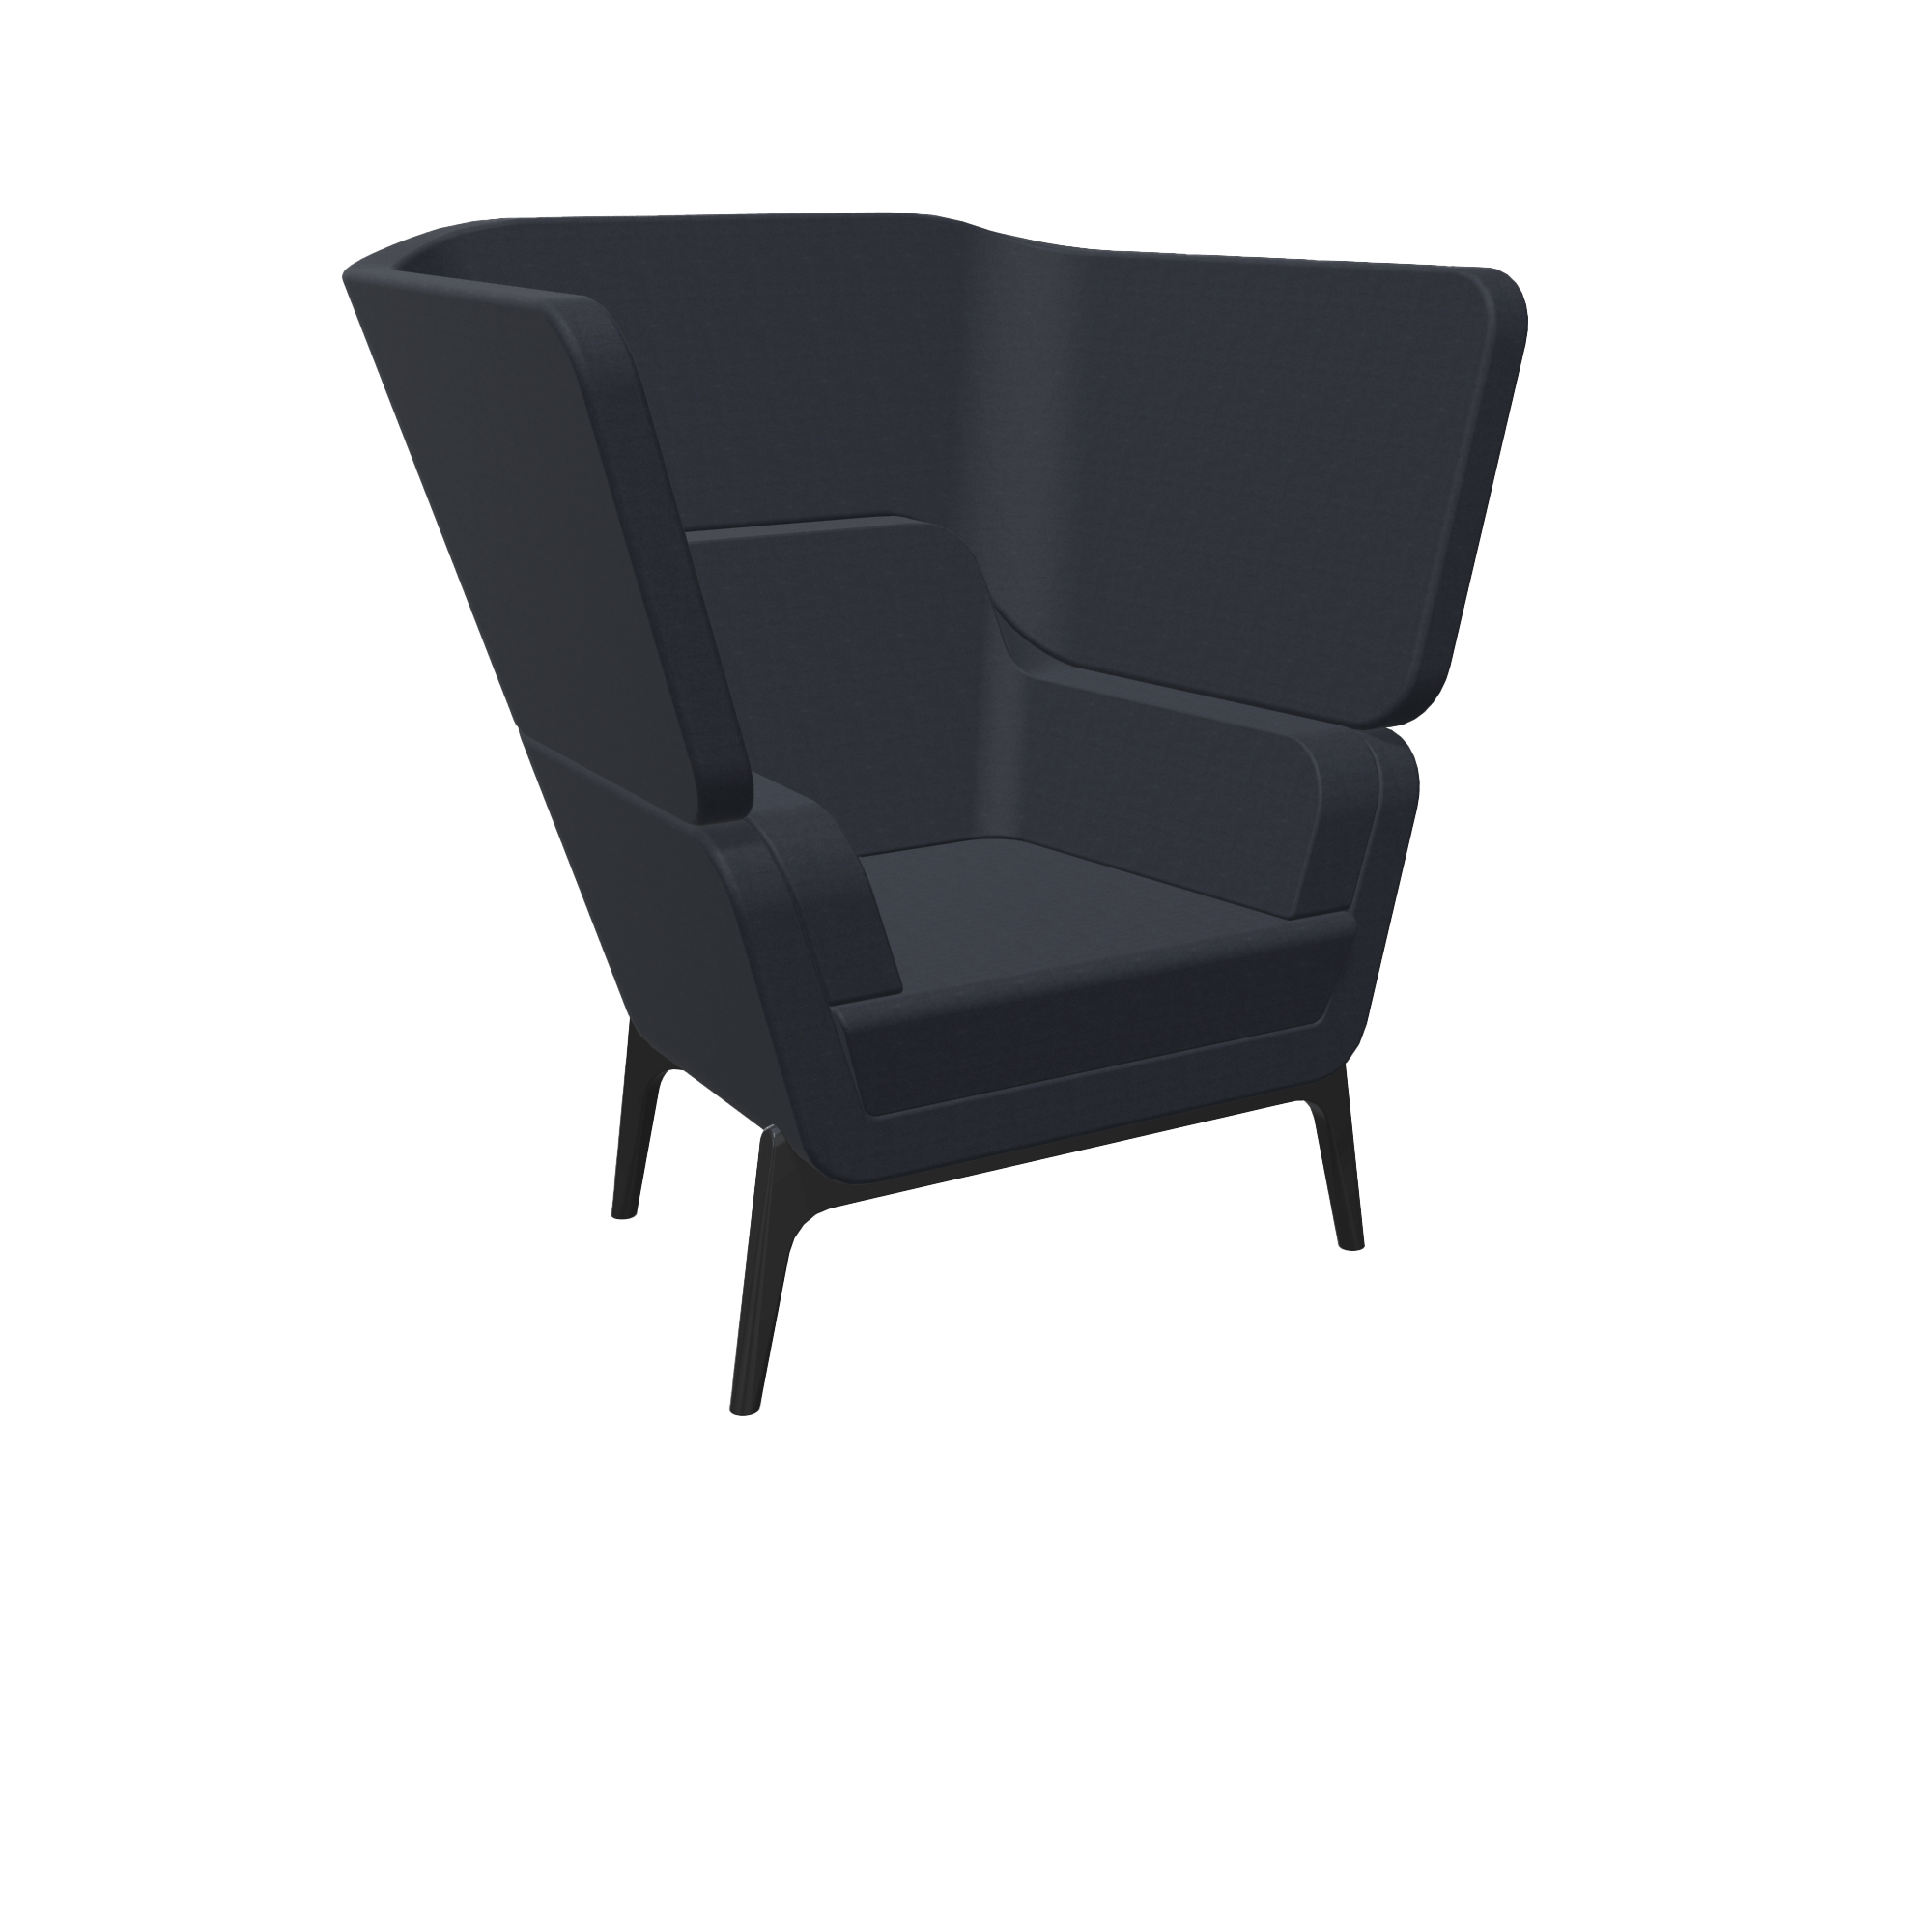 A 3d model of a black chair